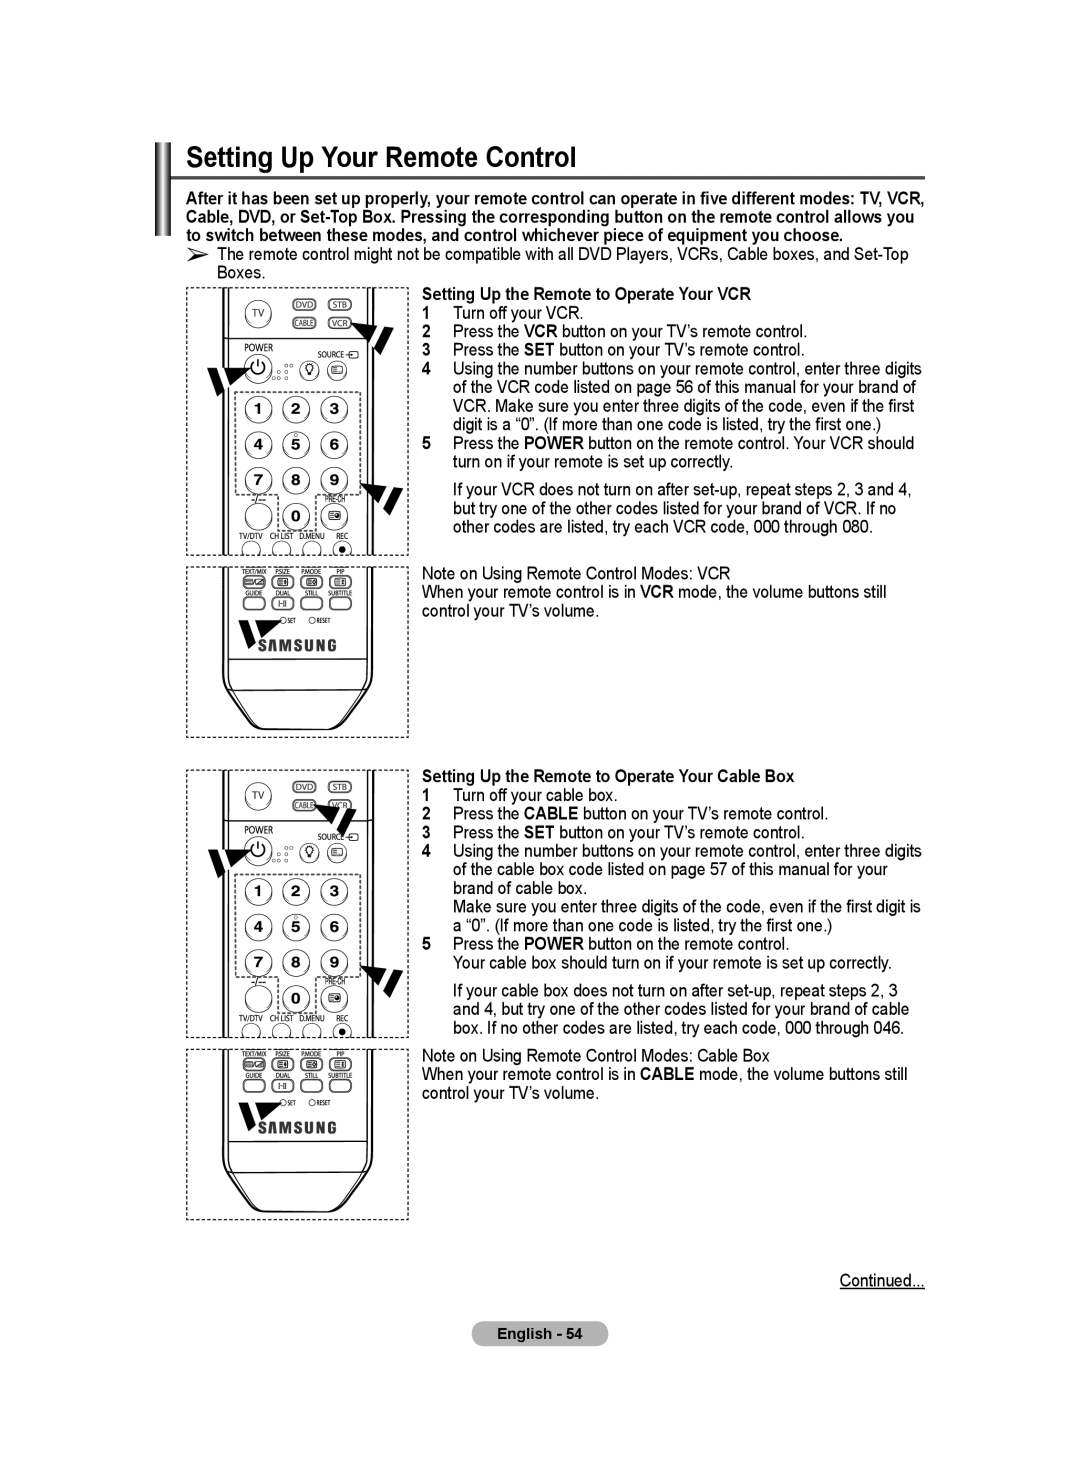 Samsung BN68-01171B-03 manual Setting Up Your Remote Control, Setting Up the Remote to Operate Your VCR 